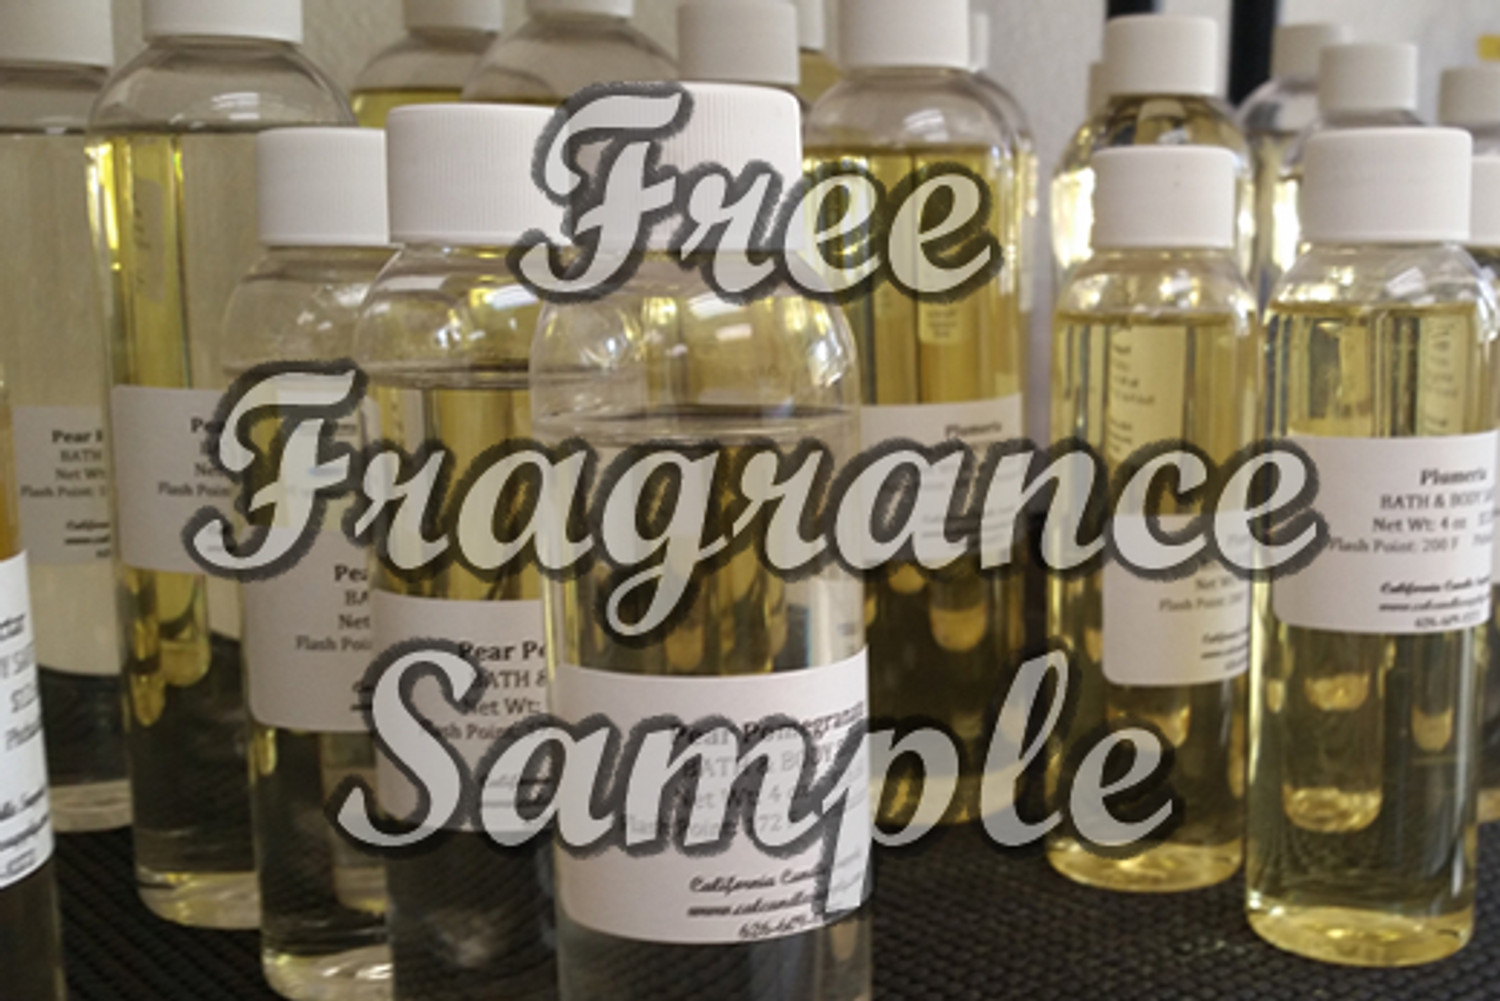 Free fragrance product samples